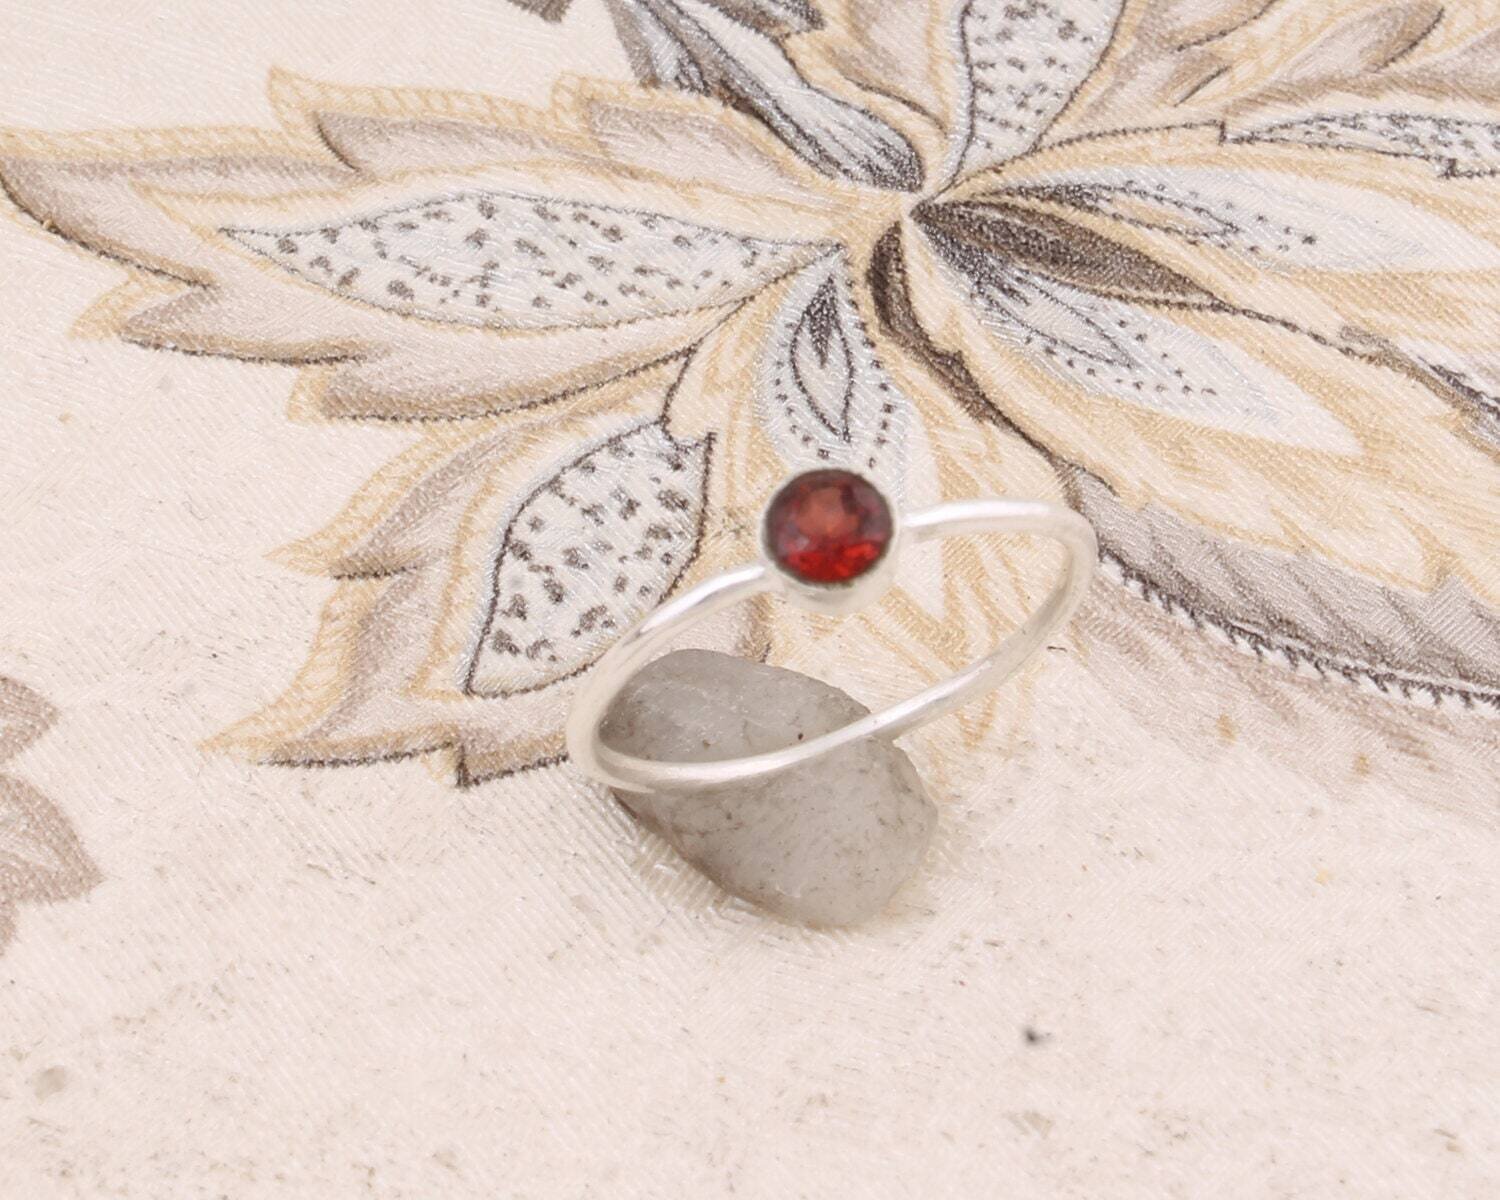 Simple Round Ring Gift For You ! Solid 925-Sterling Silver Ring With Red Garnet Gemstone Ring Handcrafted,Charm Boho Ring L#-282930-R